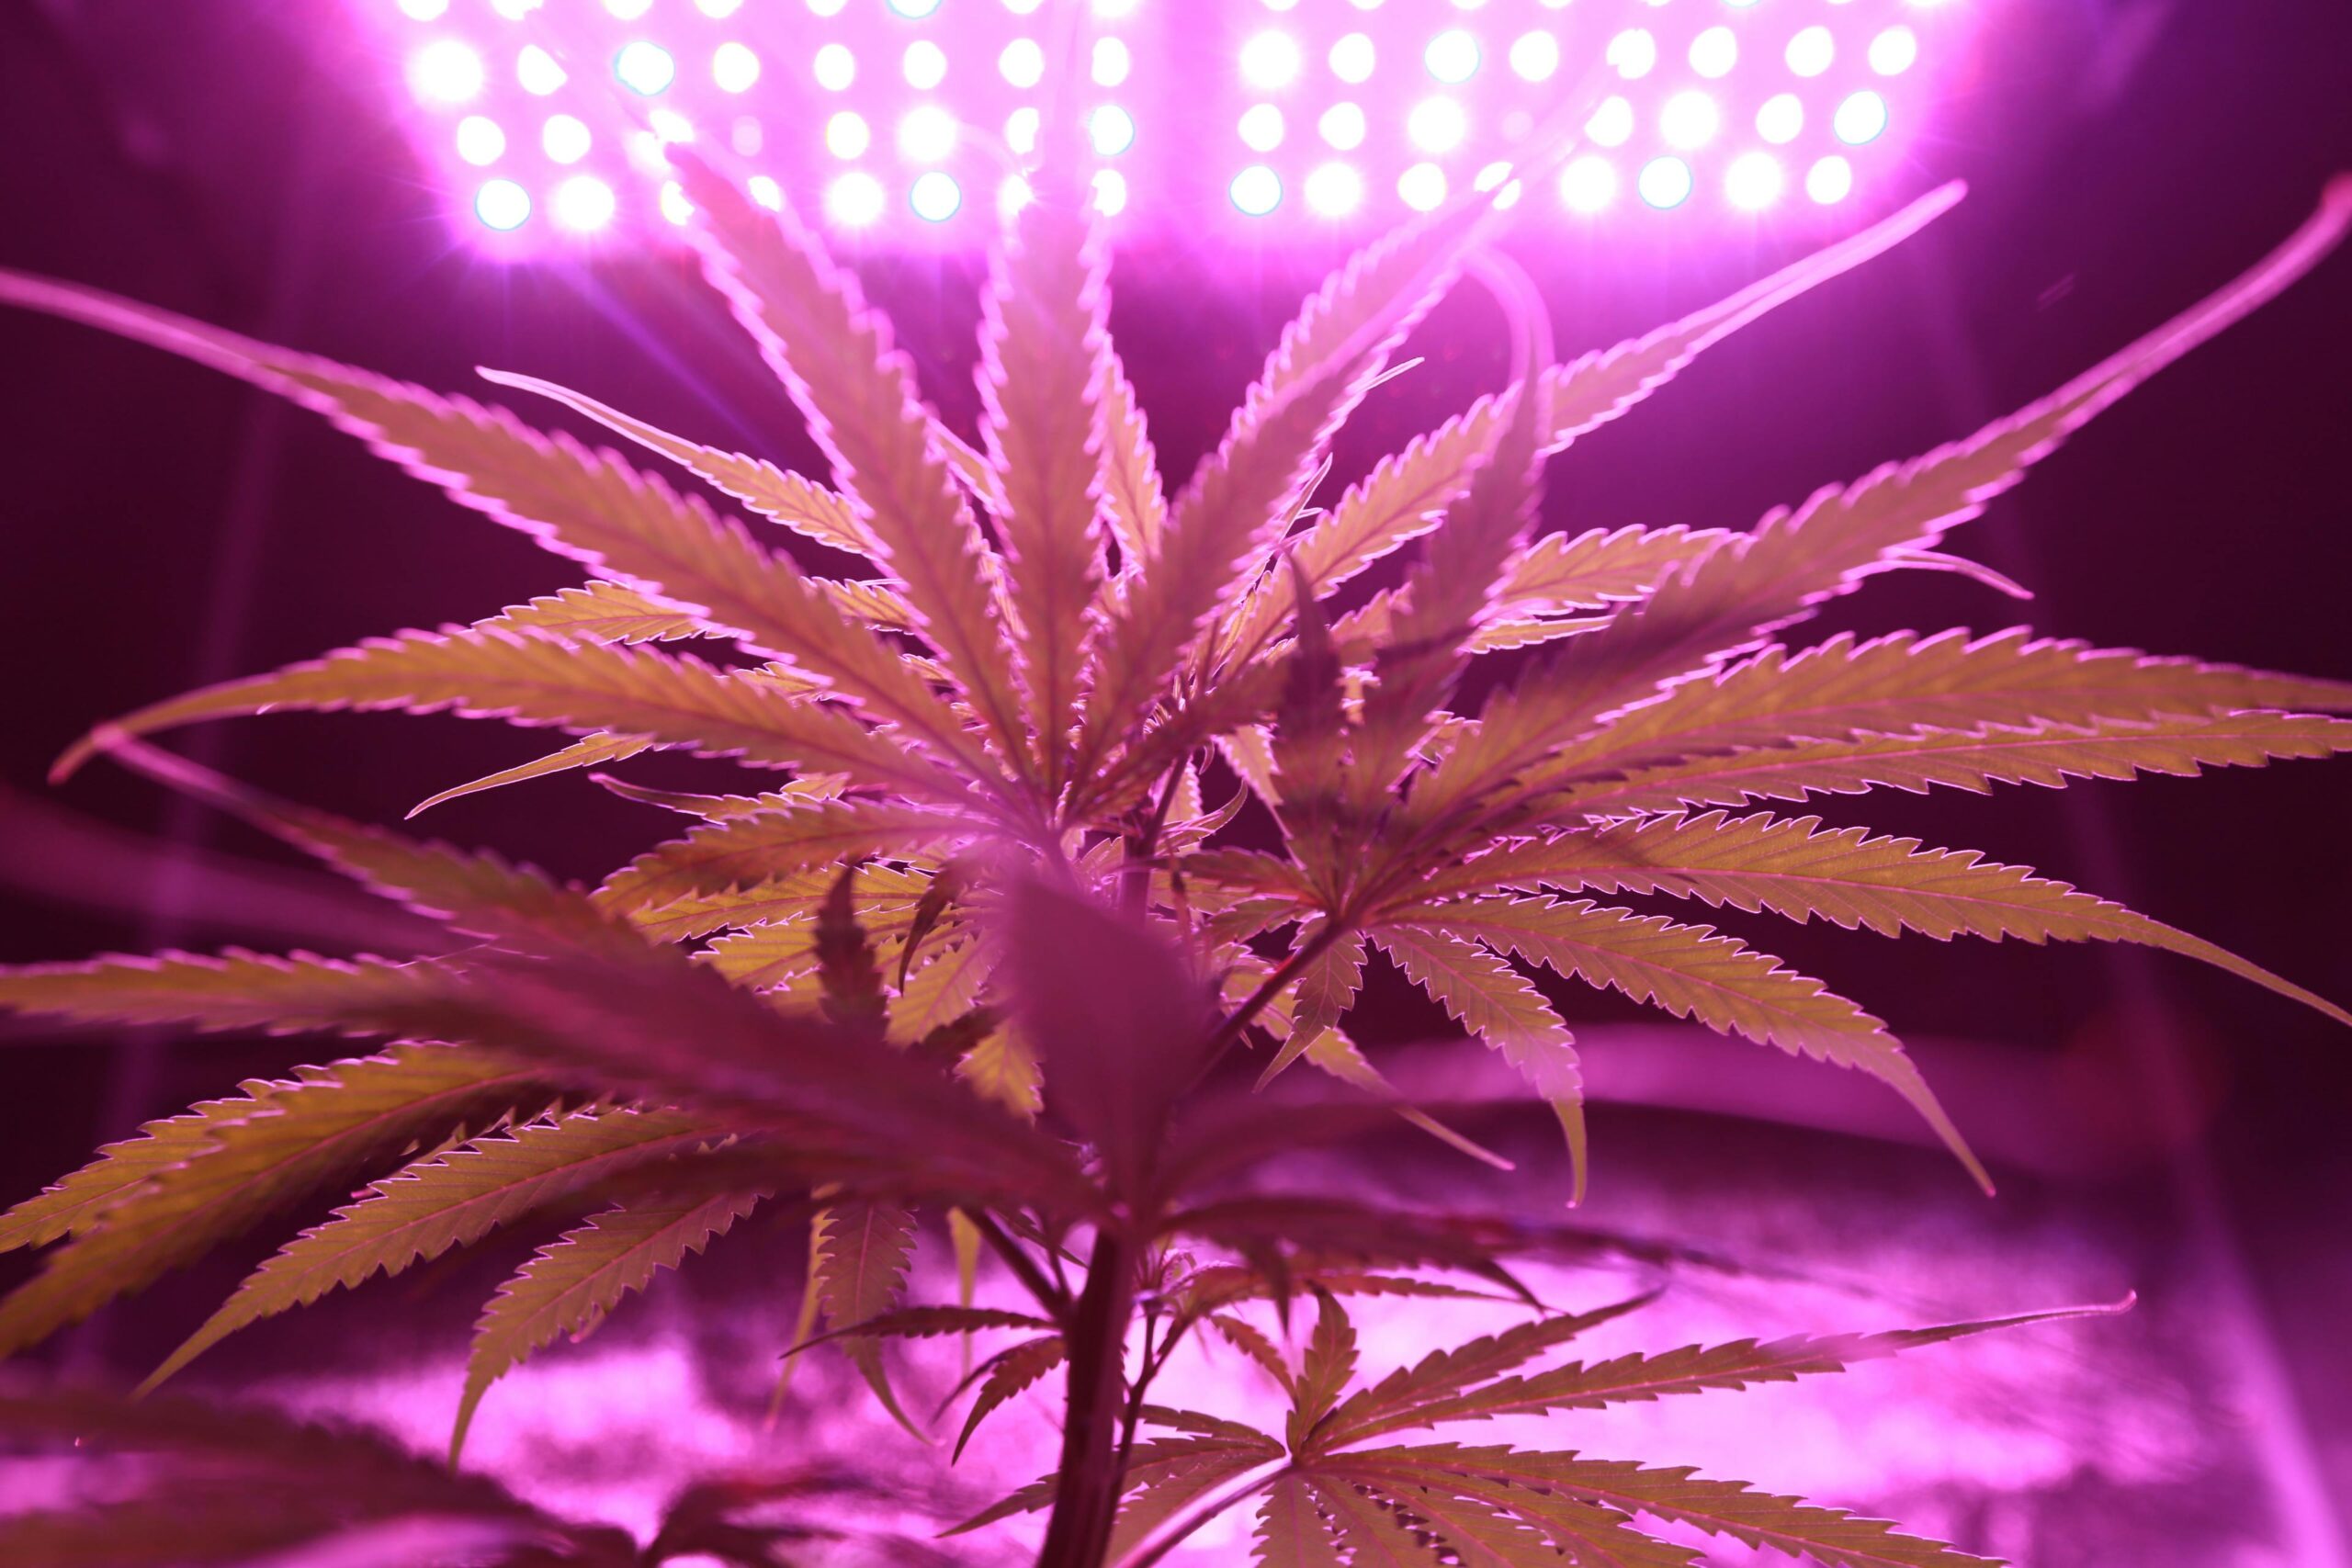 5 Tips for Growing Cannabis Indoors